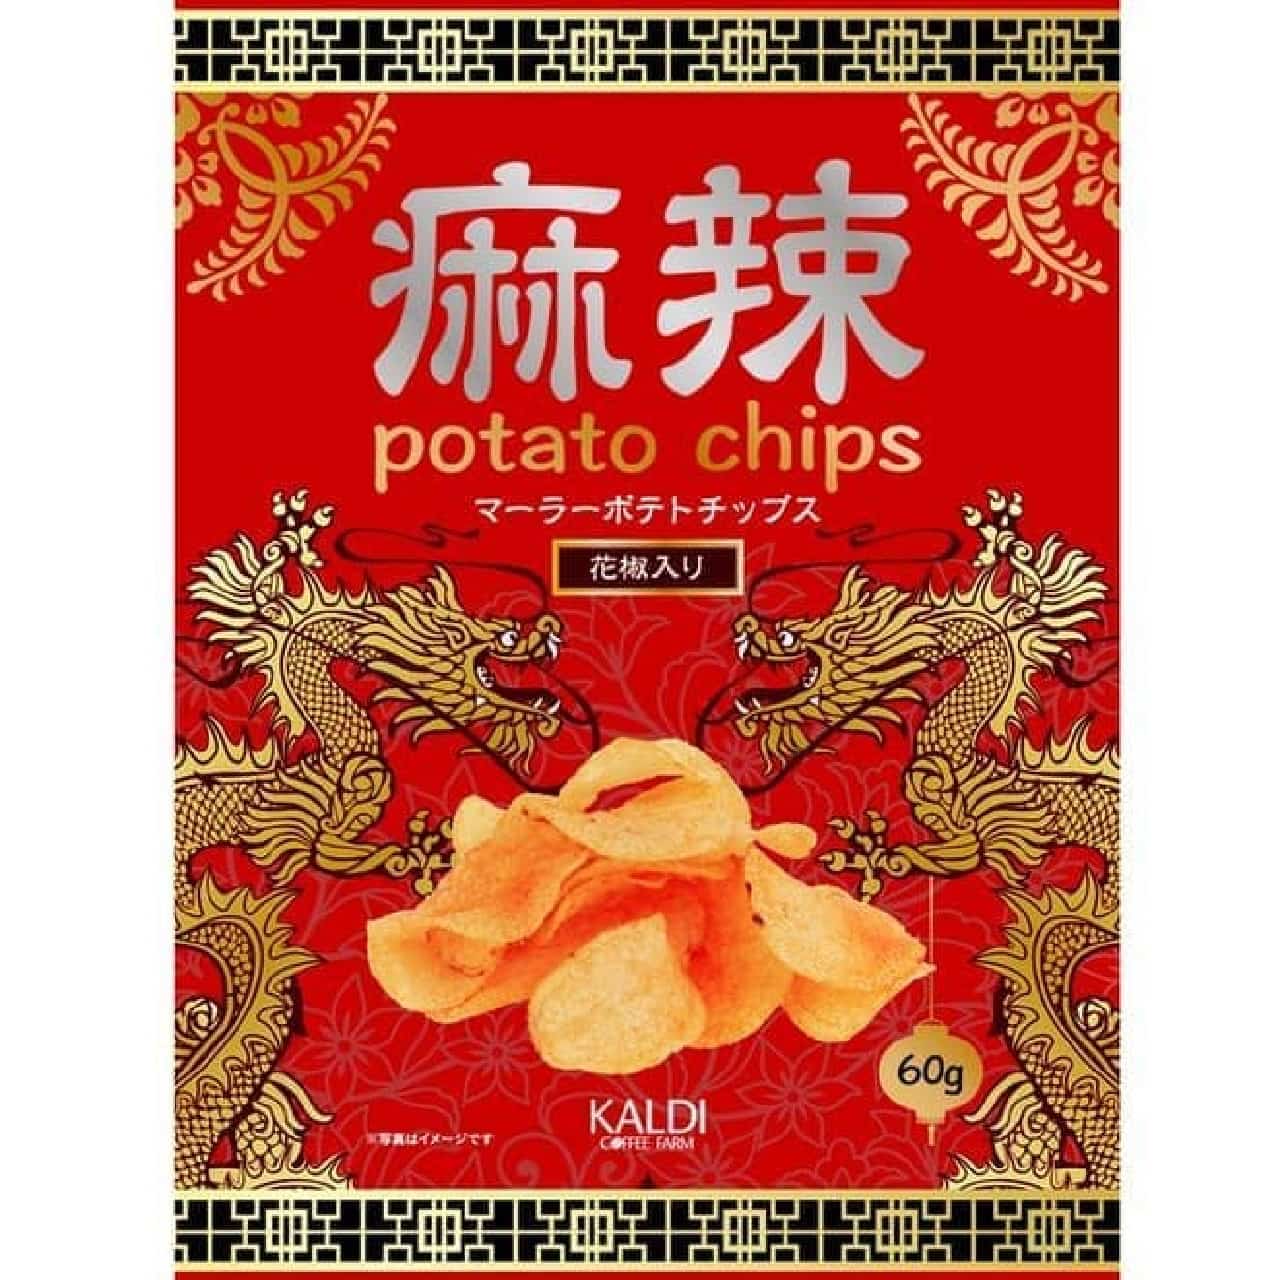 "Original Mala Potato Chips" is potato chips with the spice "Mala" that is indispensable for Sichuan cuisine such as mapo tofu and hot pot.